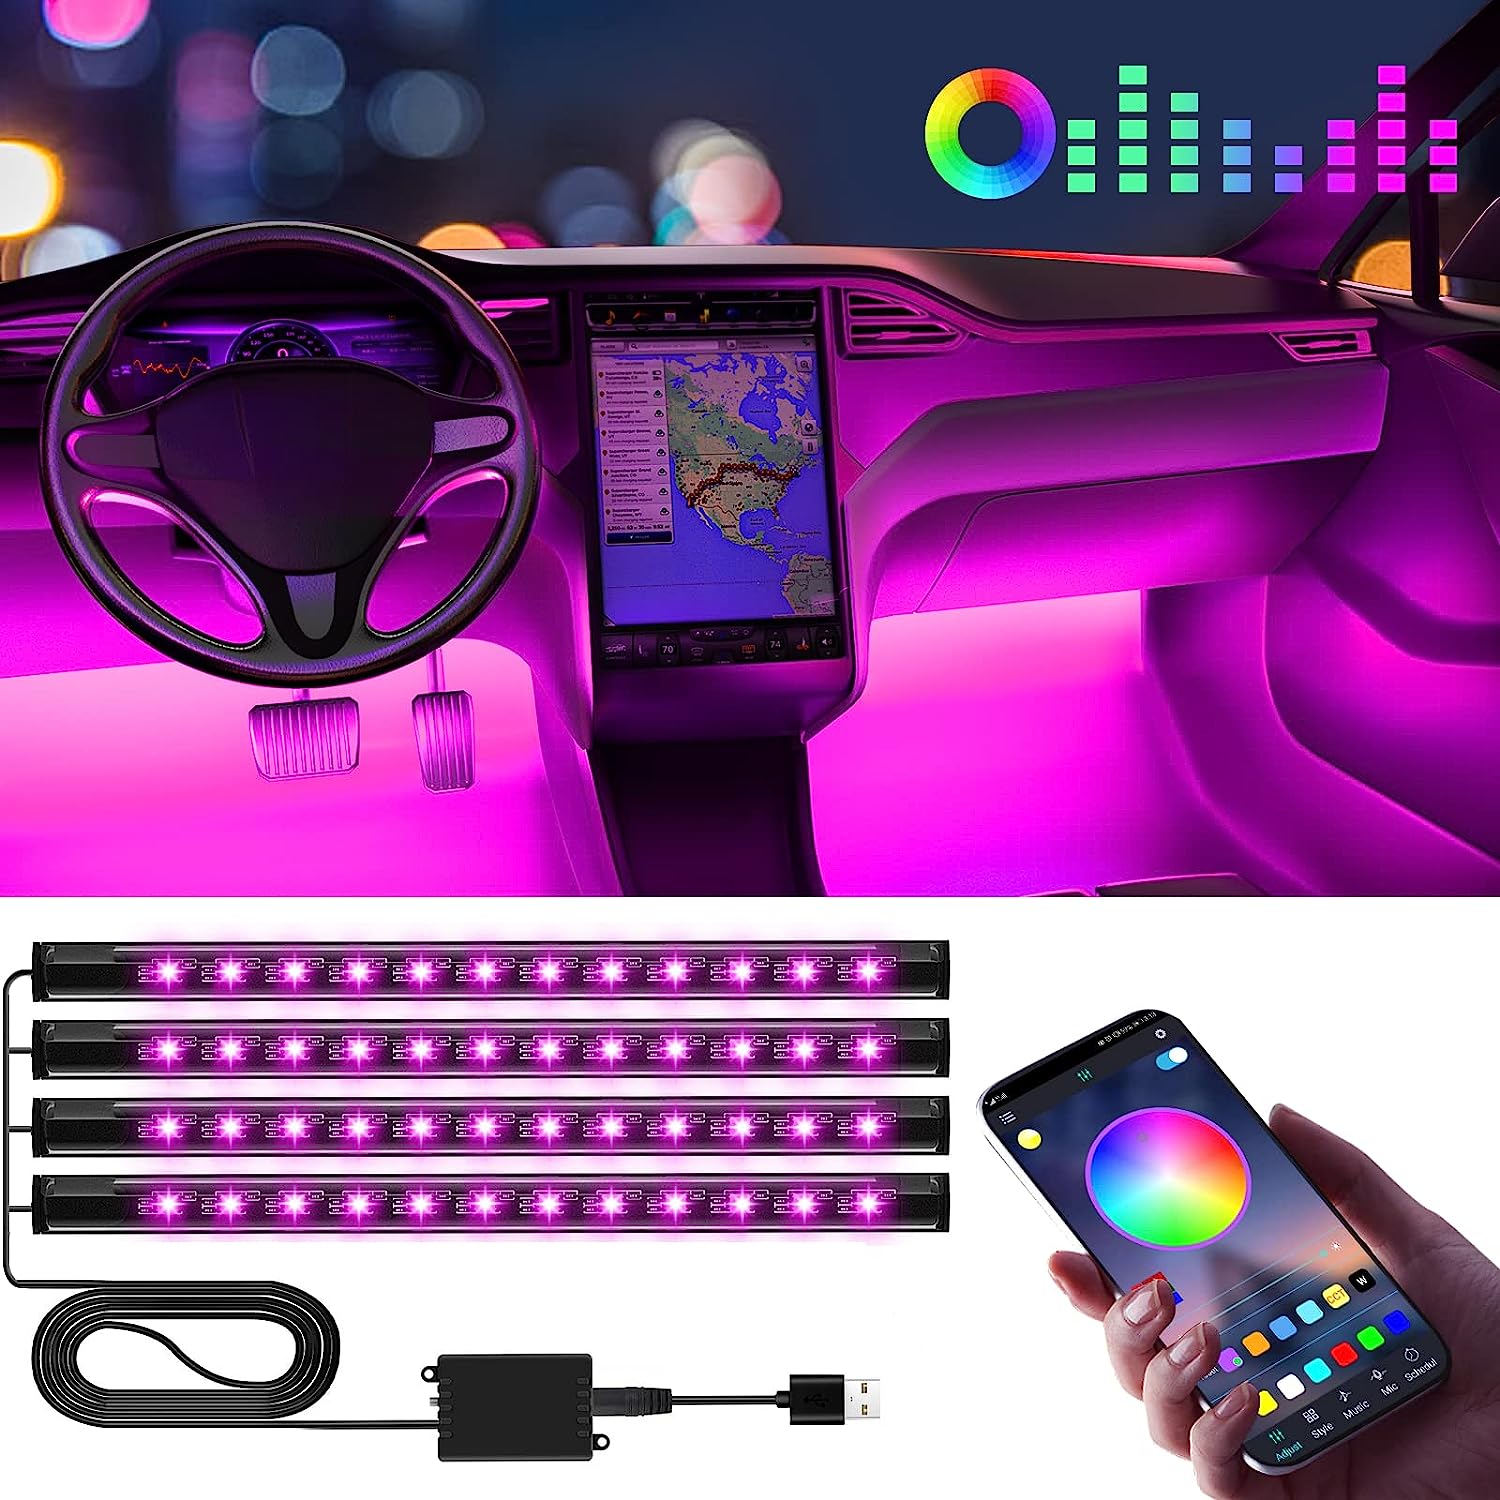 LED Interior Strip Lights with USB Port APP Control Gifts for Him Her Car Accessories for Men Women Car Stuff Lighting Kits Decoration Car Atmosphere 